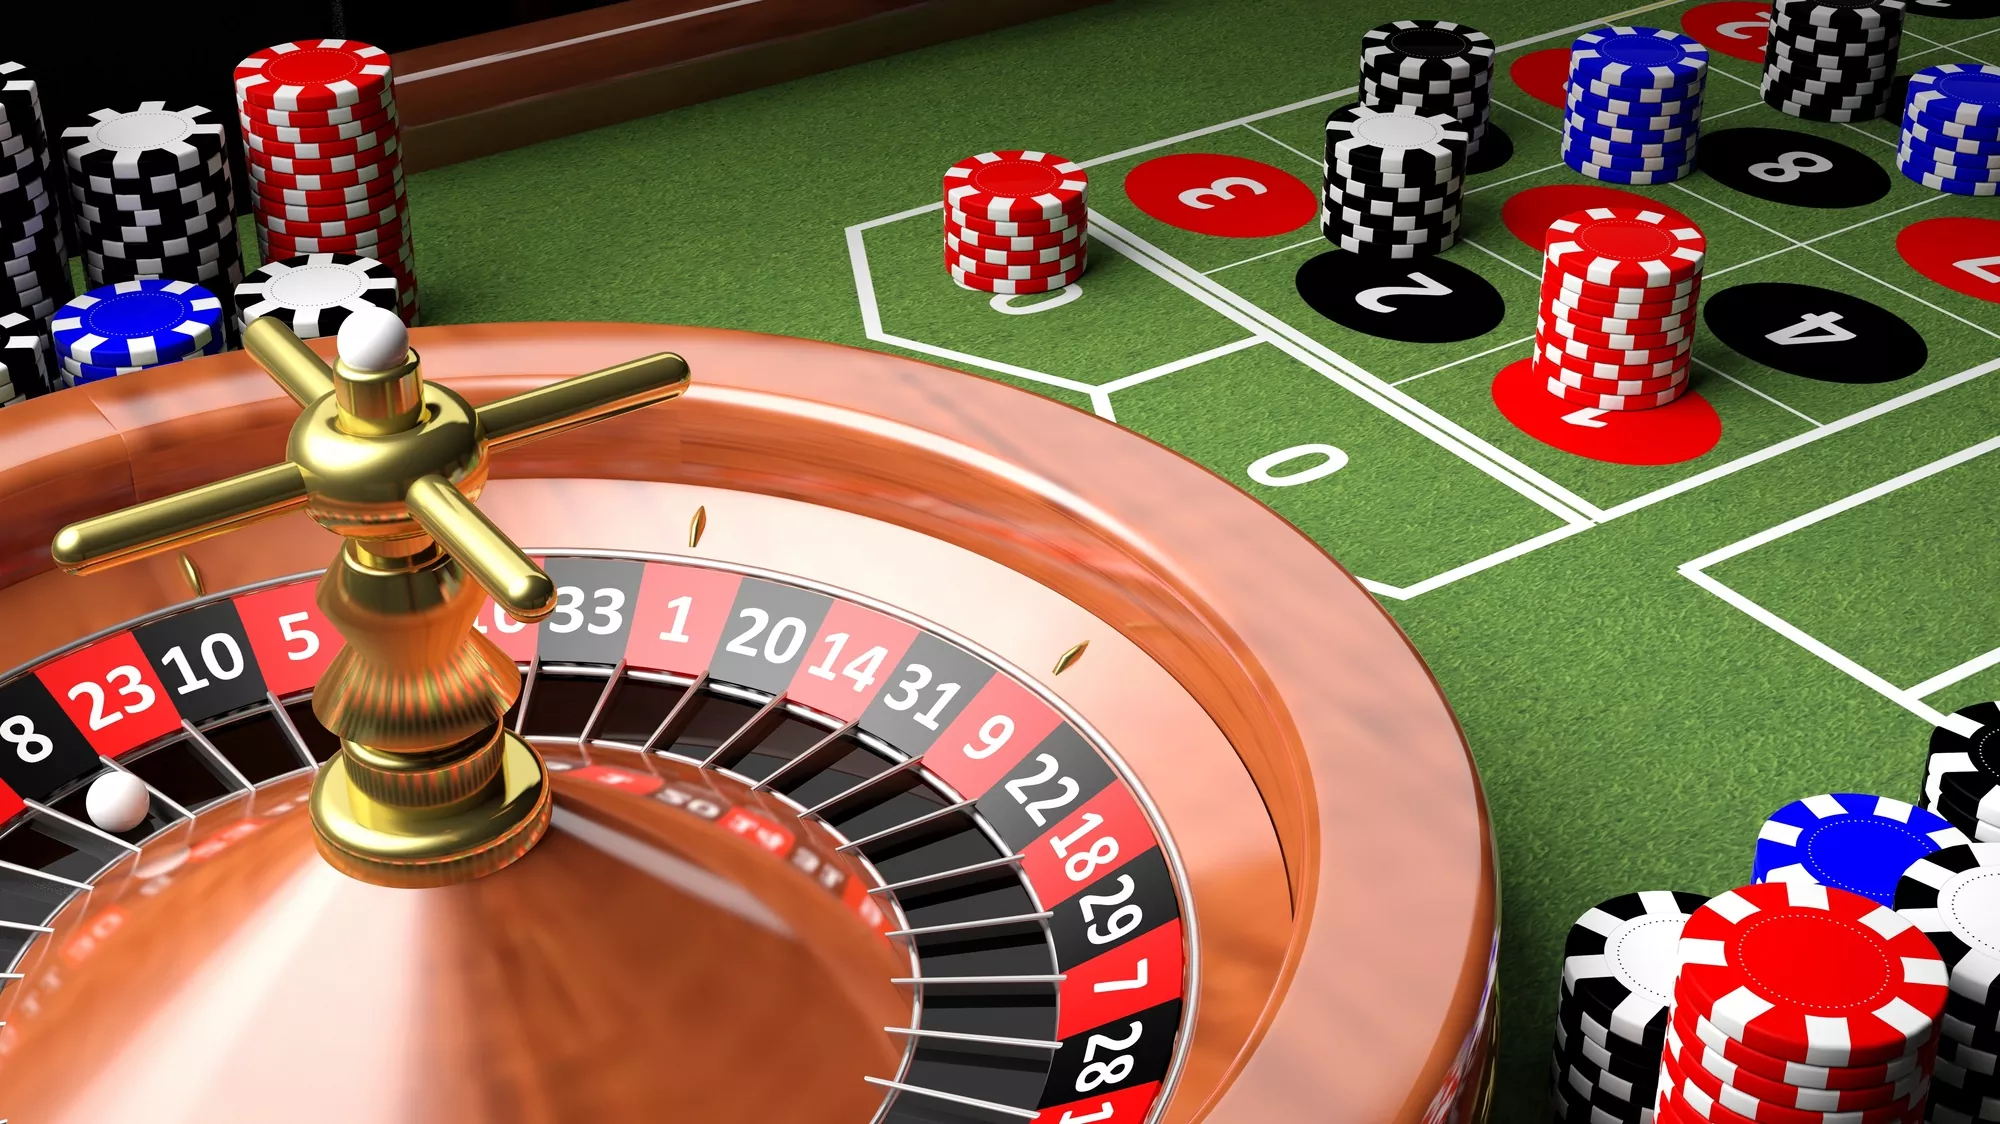 What Online Gambling Game Has The Best Odds? - ZainView